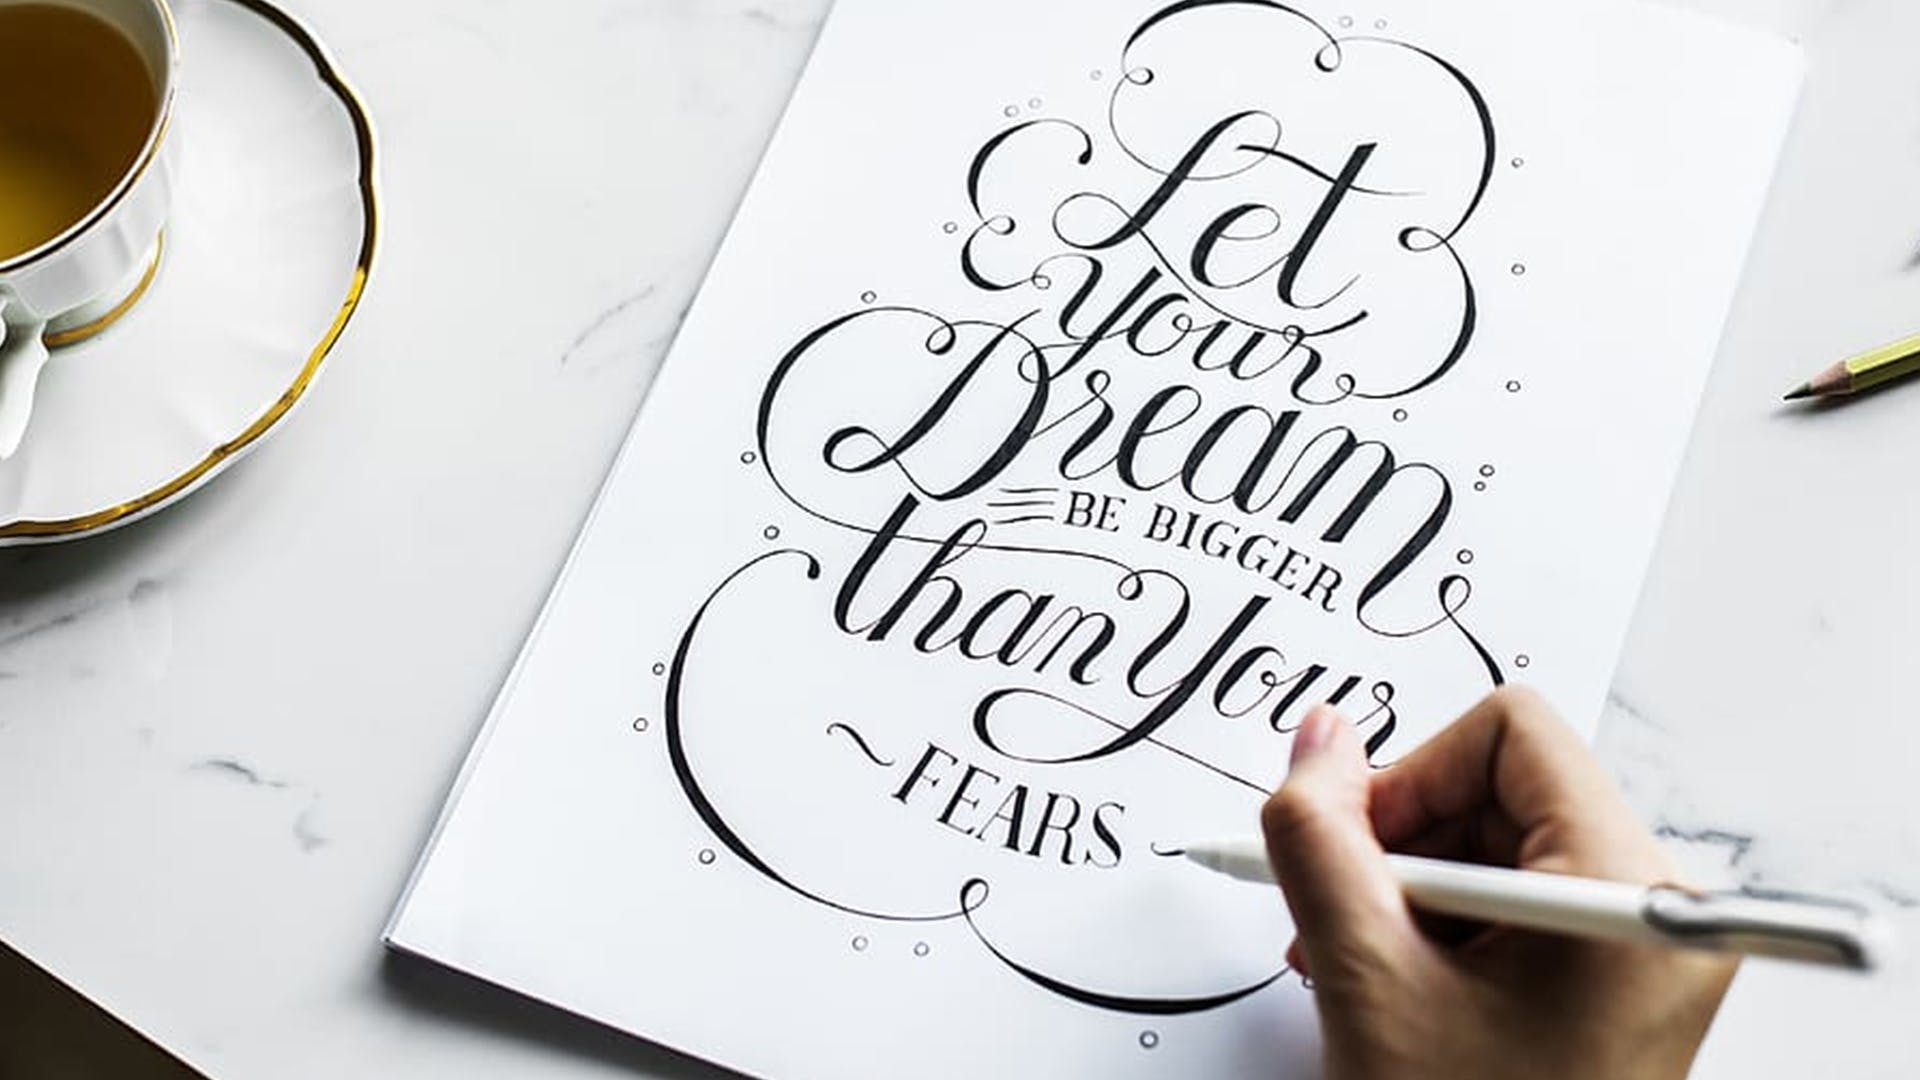 Buy Calligraphy Supplies Online At Millennial Lettering |LBB